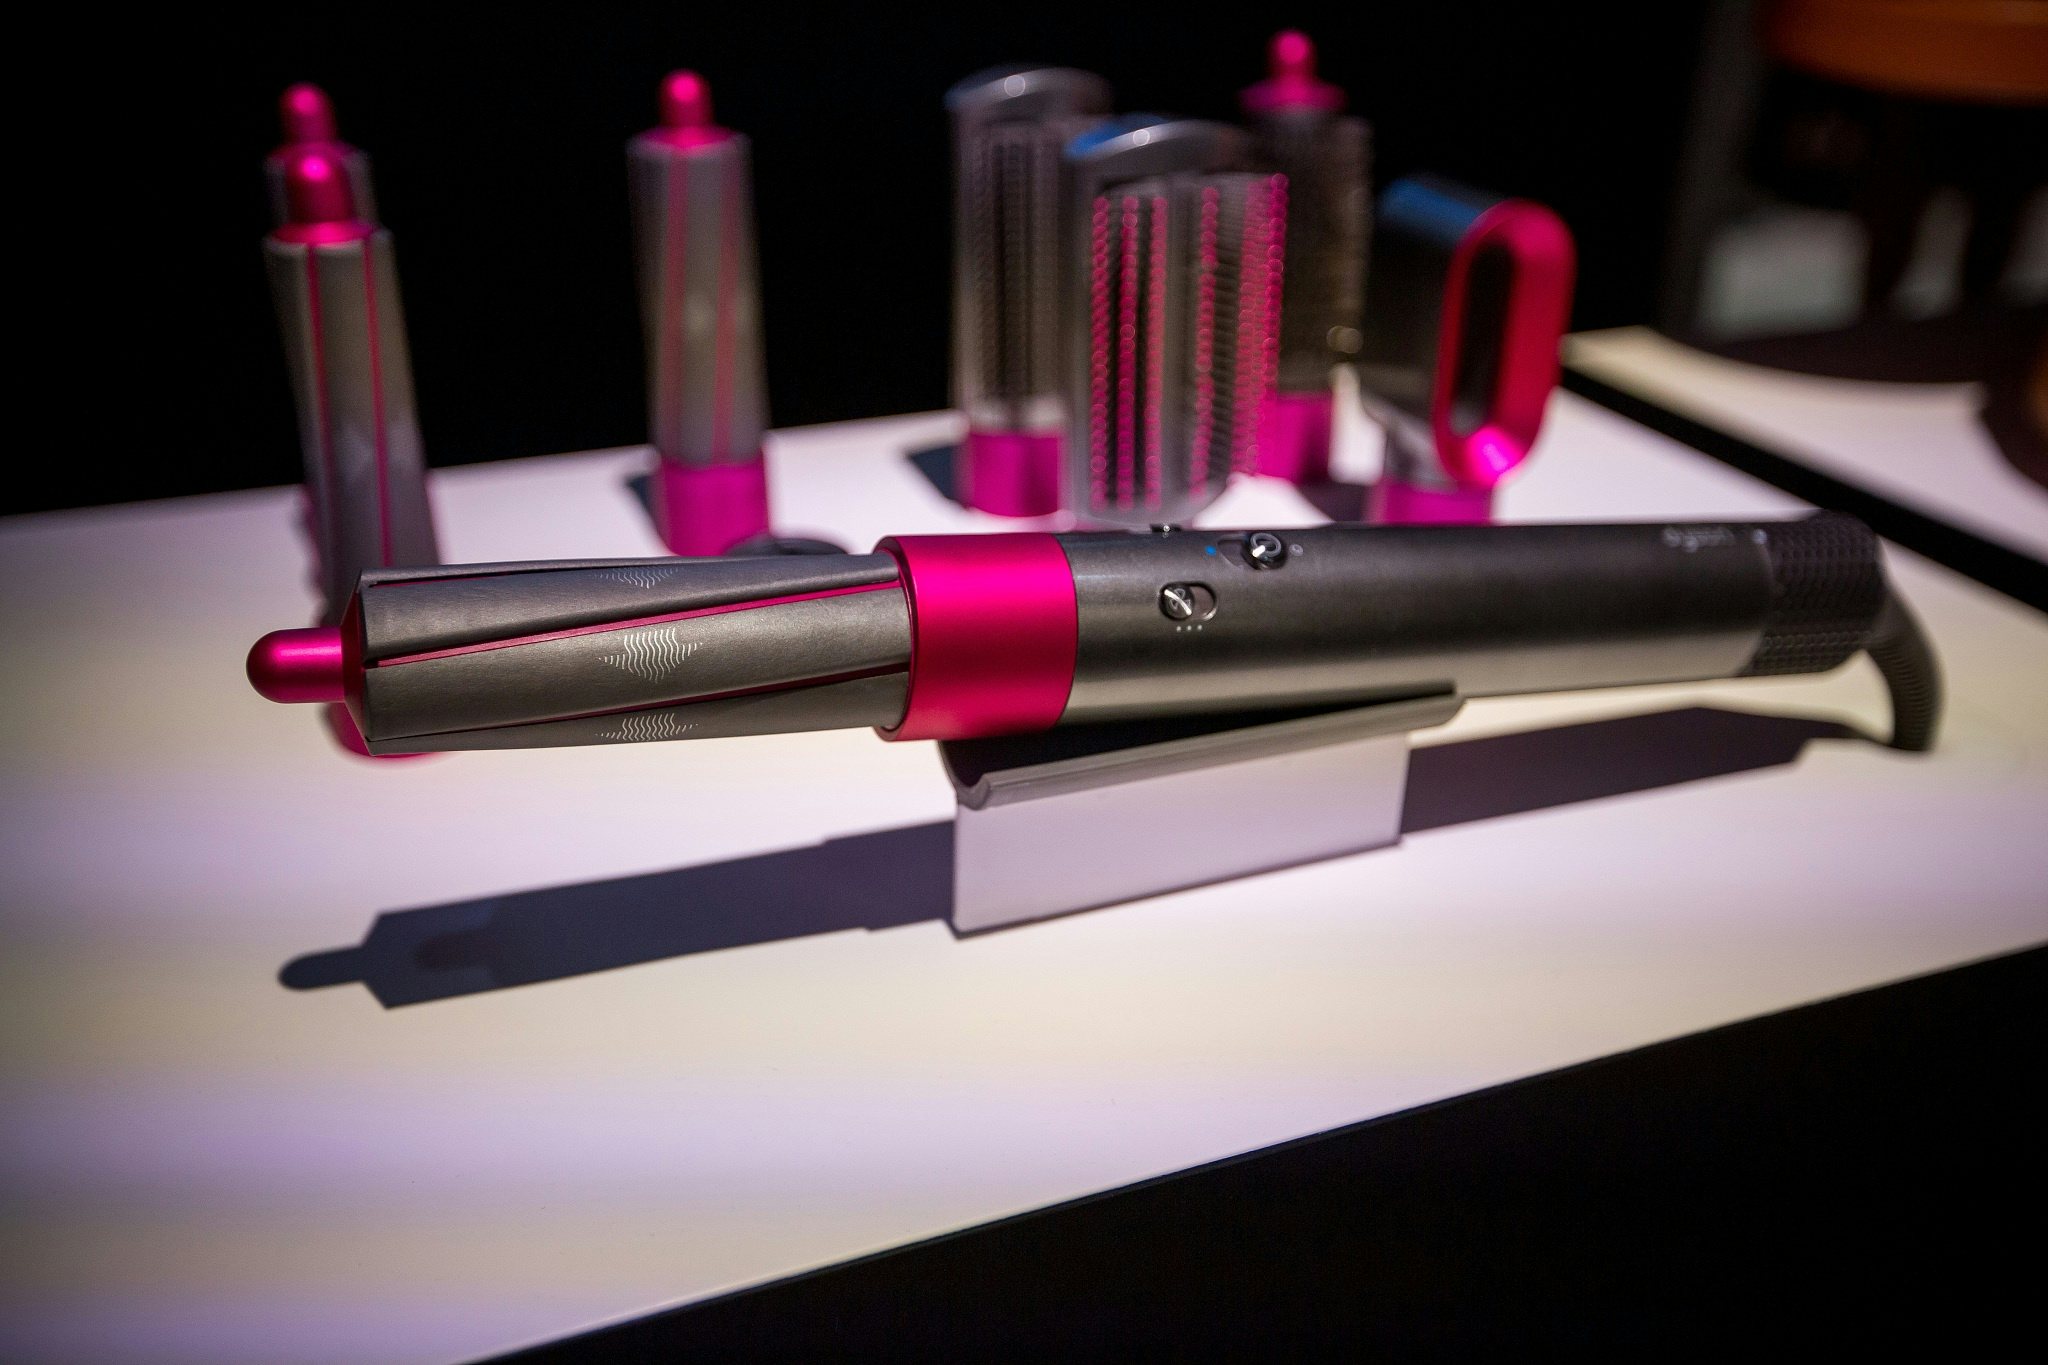 An influencer endorsement/video of this new 550 (RMB 3,804) Dyson curling iron set had 11 million page views in 24 hours. Photo: VCG